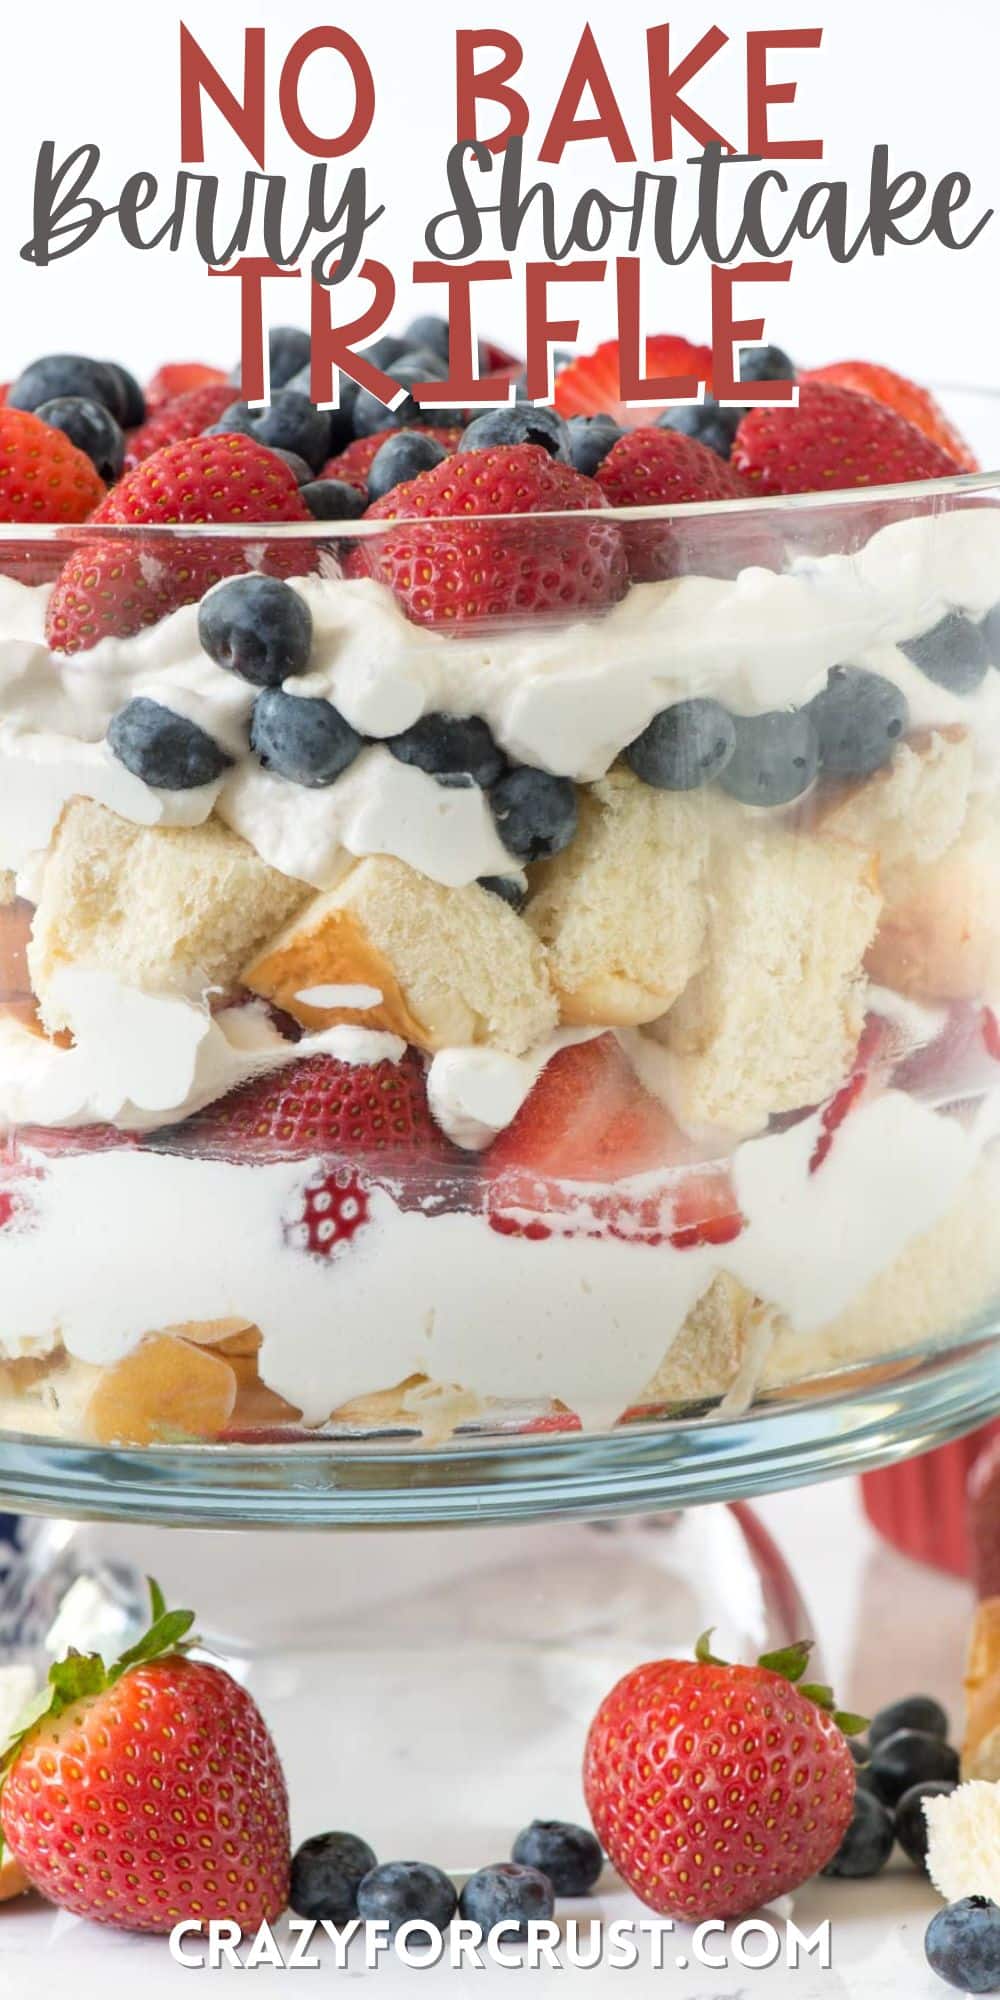 trifle mixed with strawberries and blueberries and bread in a clear jar with words in the image.